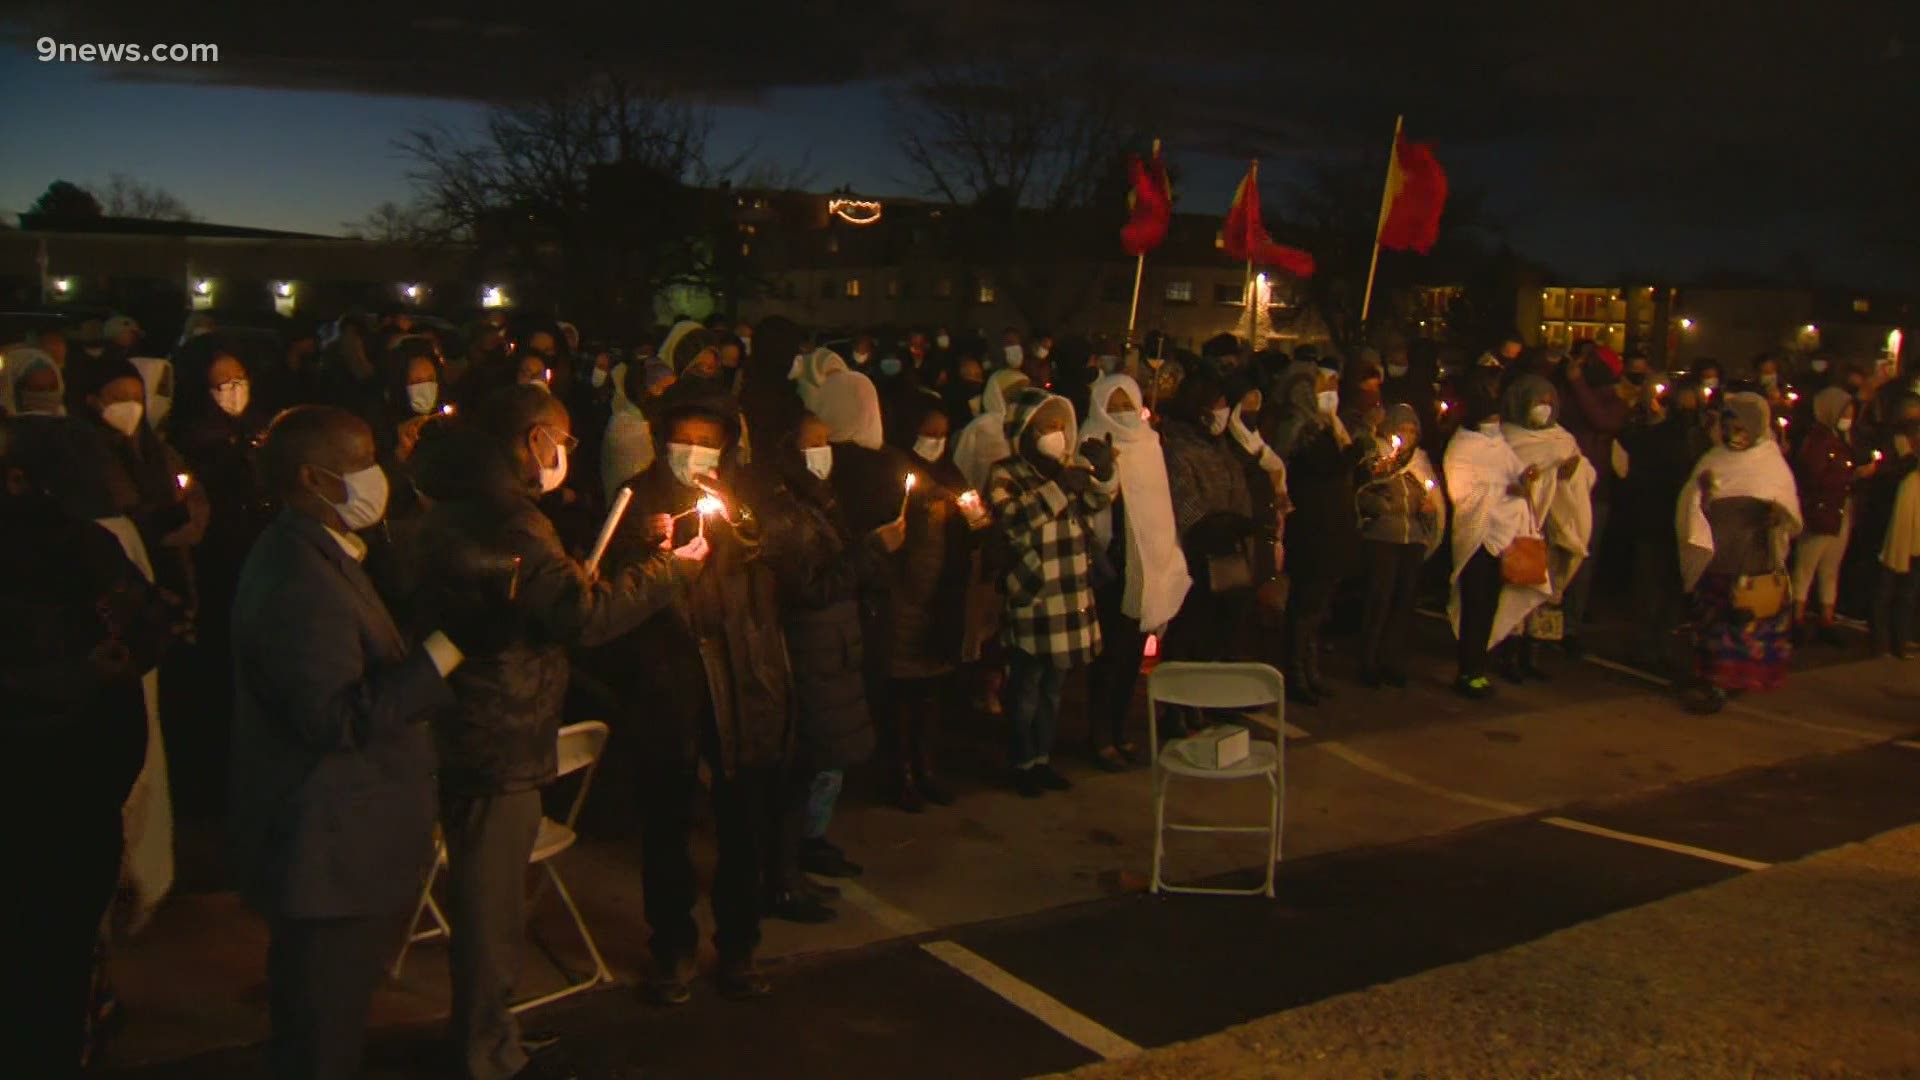 They gathered for a candlelight vigil in Aurora Sunday night.